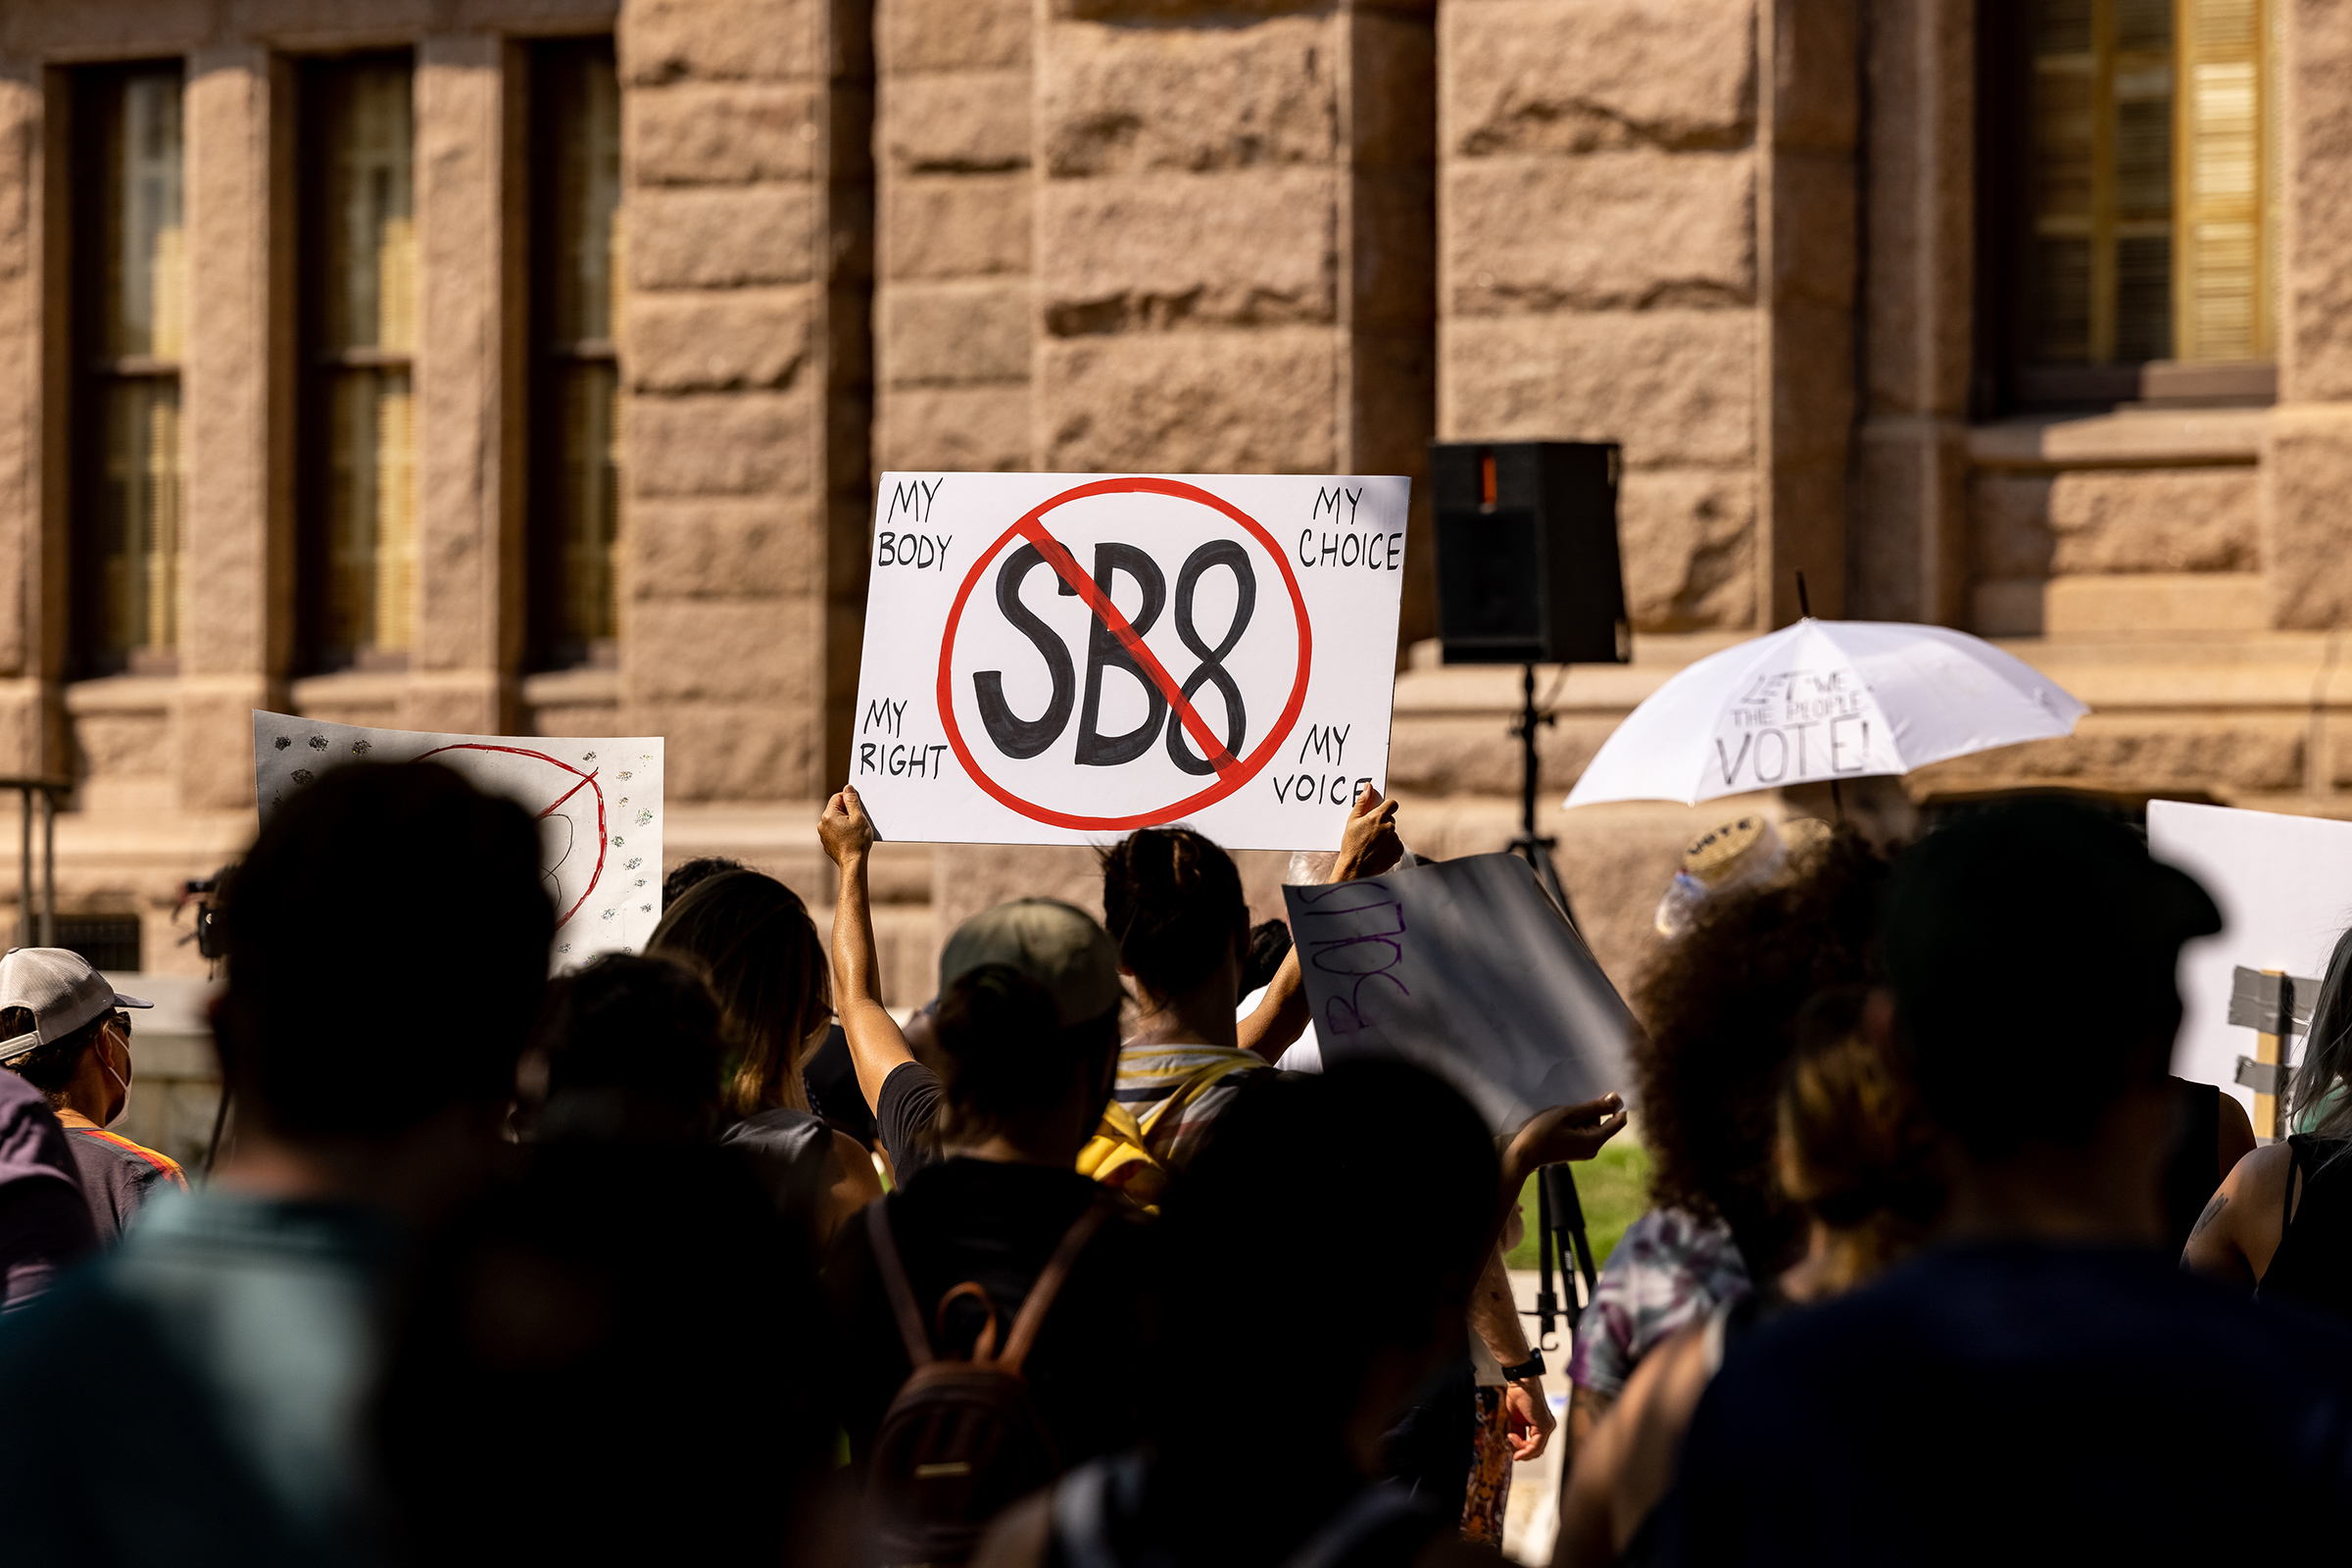 Abortion rights activists rally at the Texas State Capitol in Austin, Texas on Sept. 11, 2021. (Jordan Vonderhaar—Getty Images)